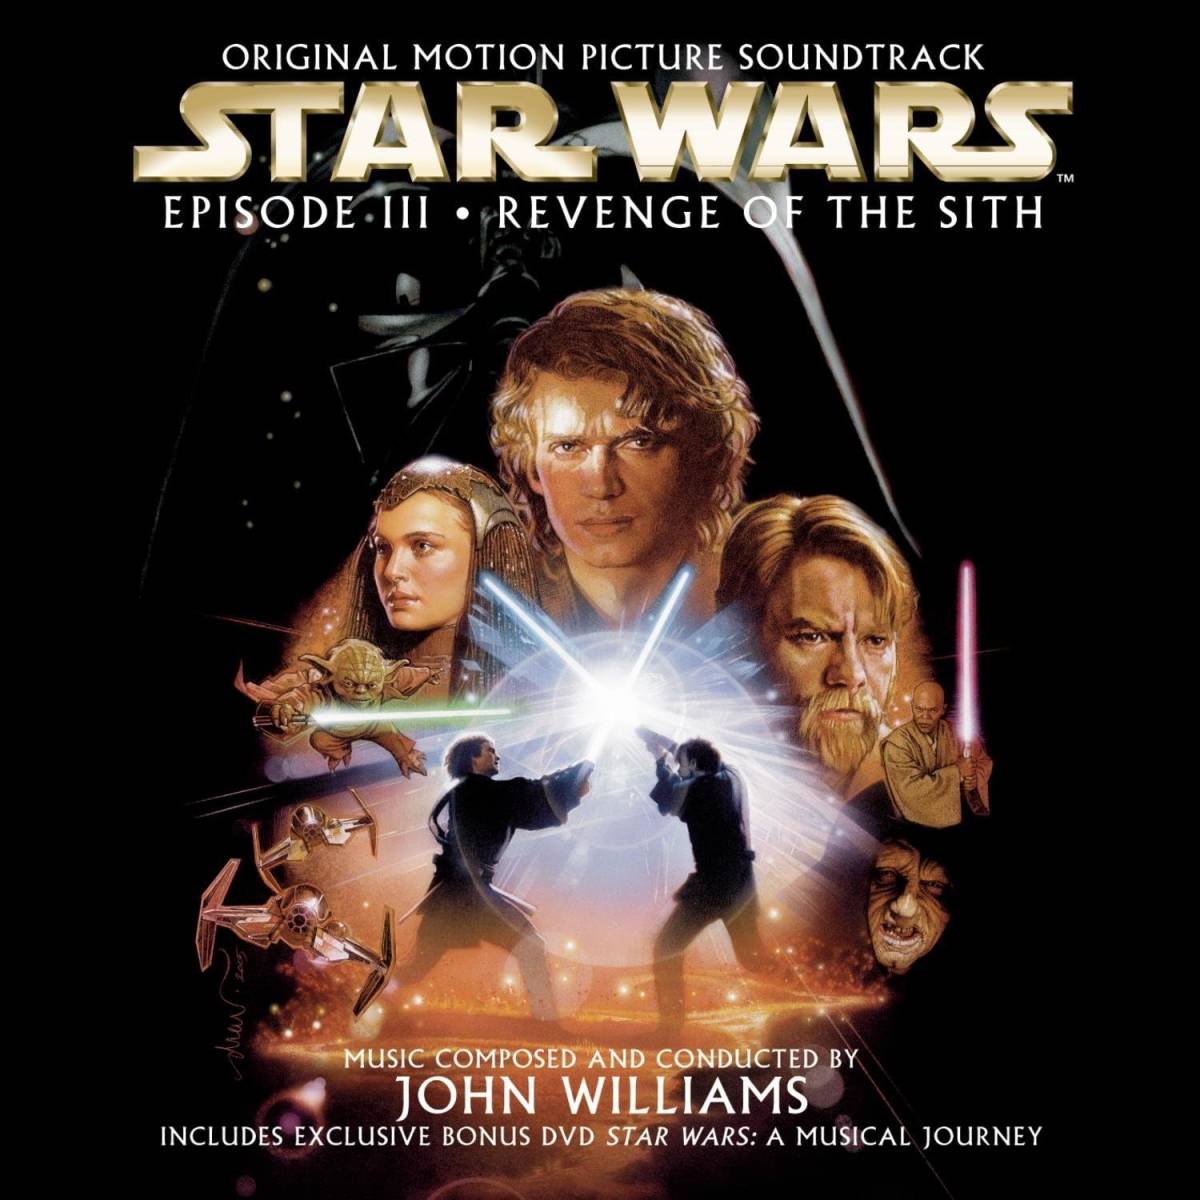 Star Wars: Episode III - Revenge of the Sith ウィリアムス(ジョン) 輸入盤CD_画像1